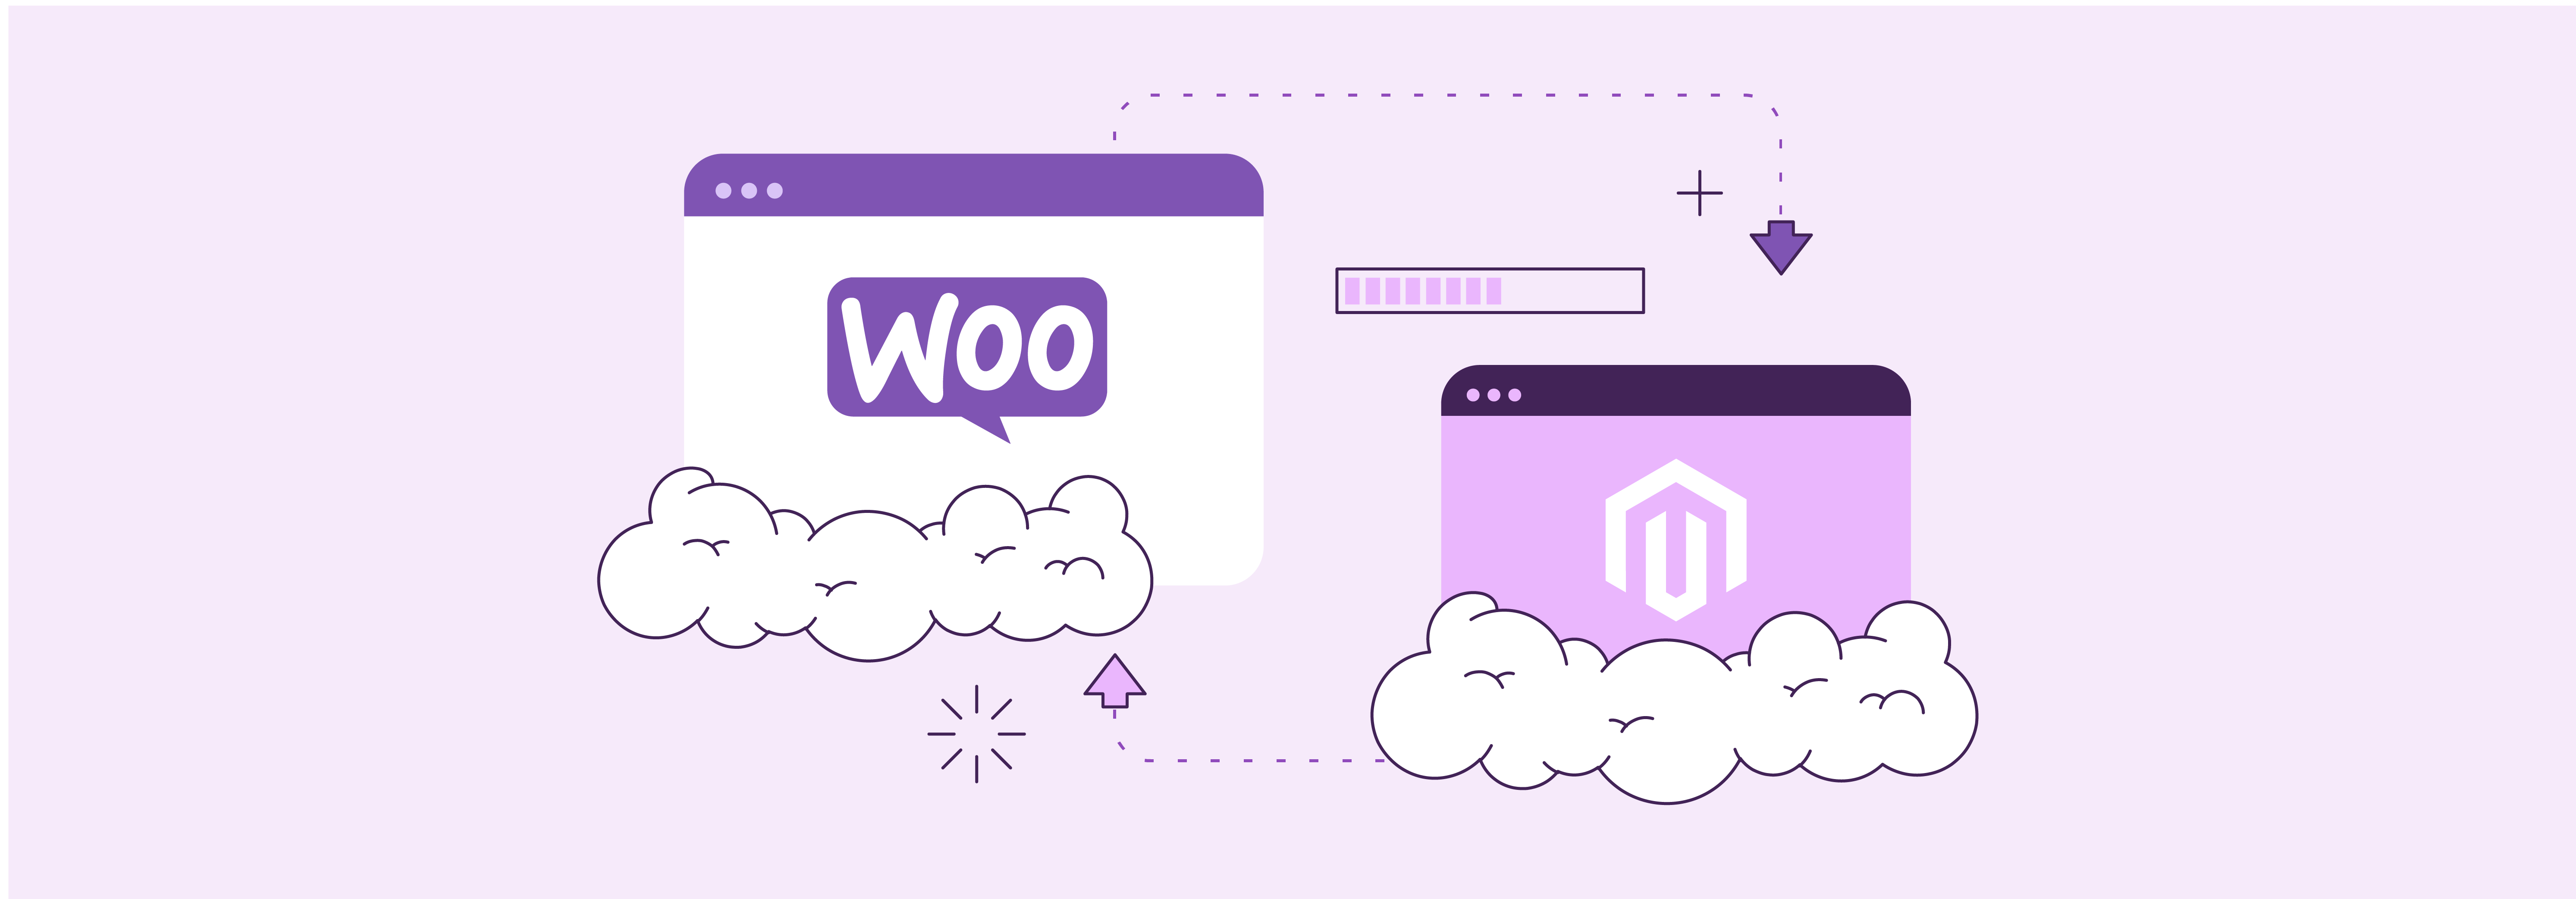 WooCommerce to Magento Migration Process